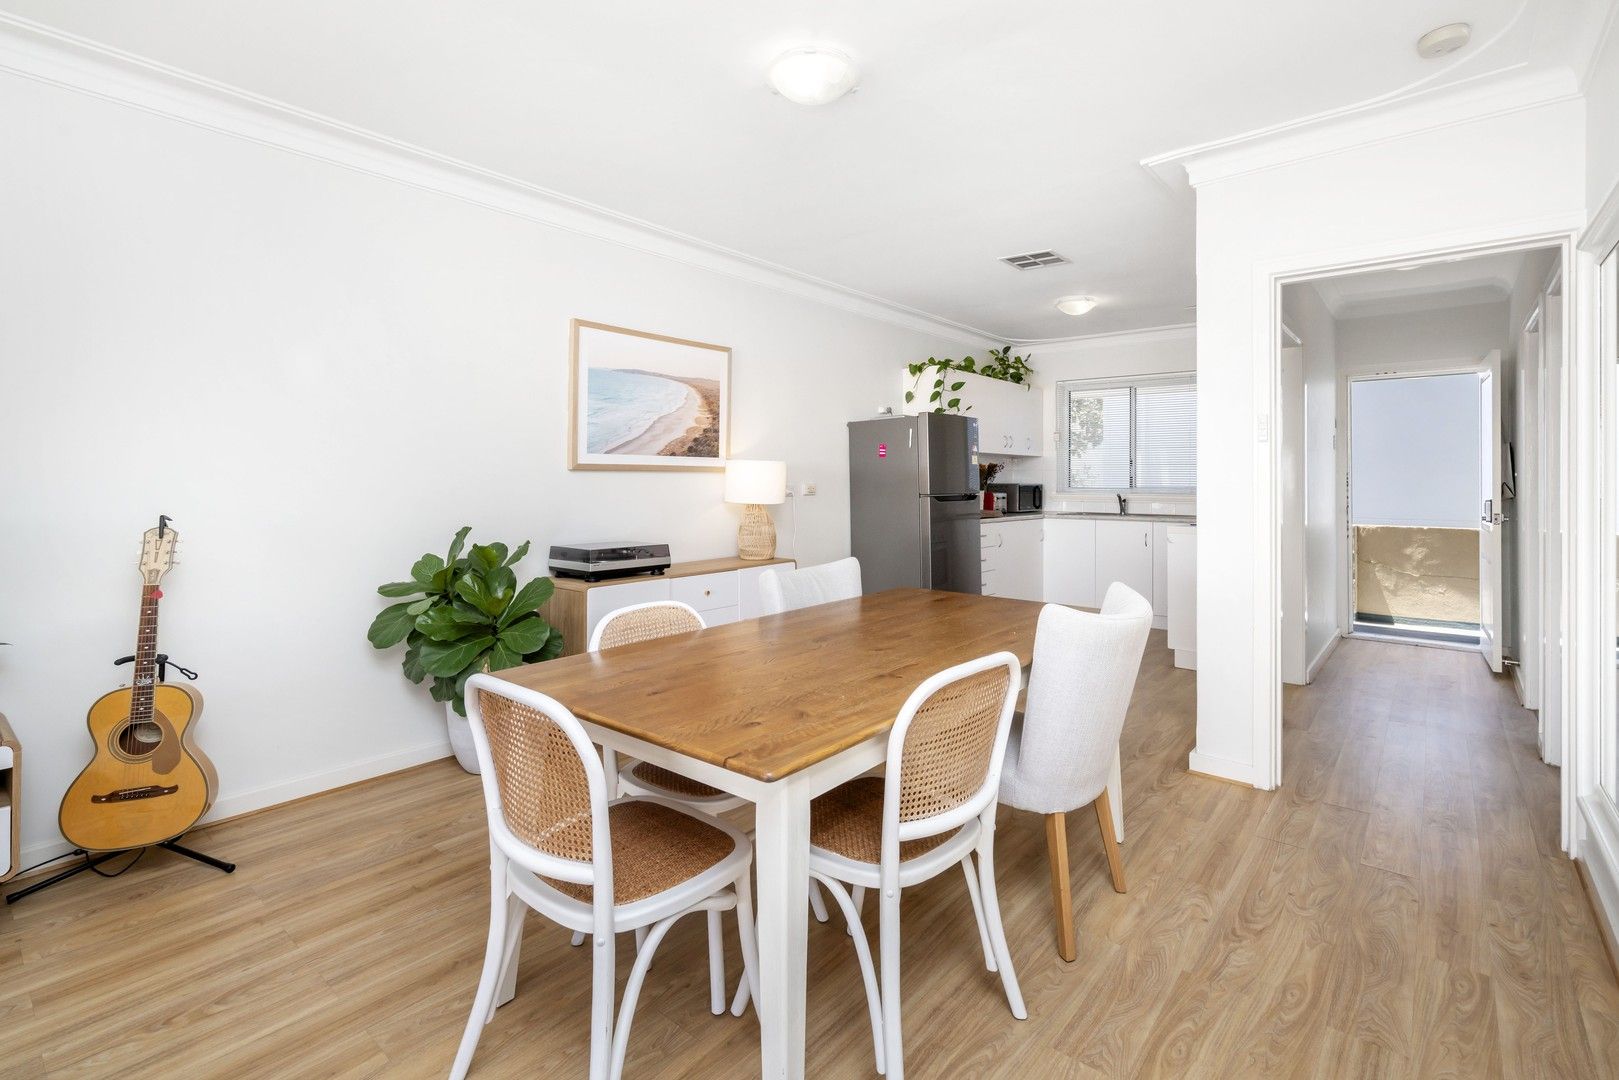 2 bedrooms Apartment / Unit / Flat in 4/18 Beach Street COTTESLOE WA, 6011